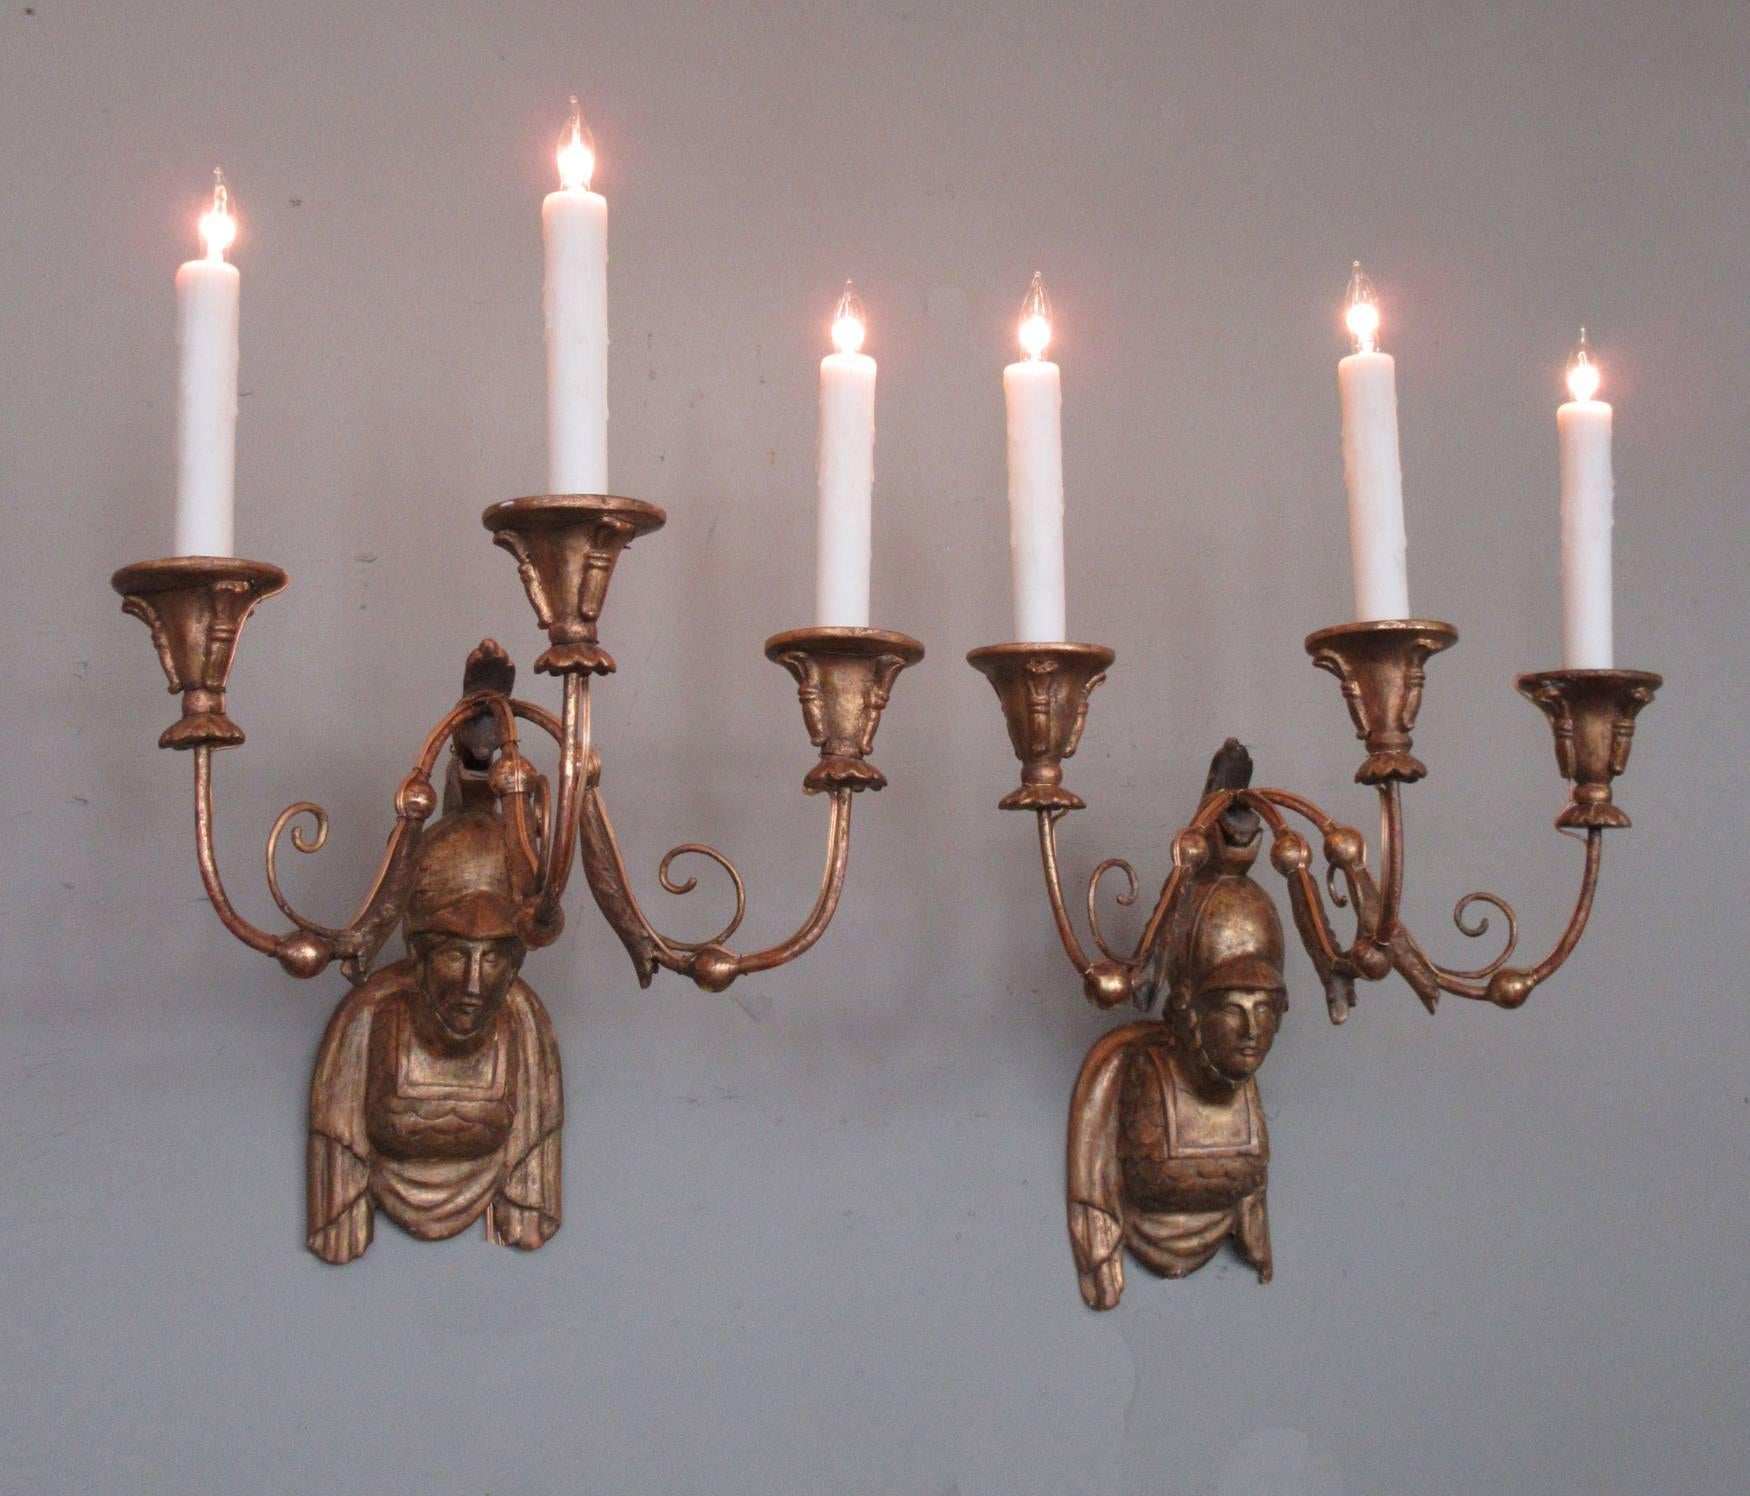 Early 19th Century Italian Neoclassical Giltwood Sconces with Roman Soldier Bust For Sale 6